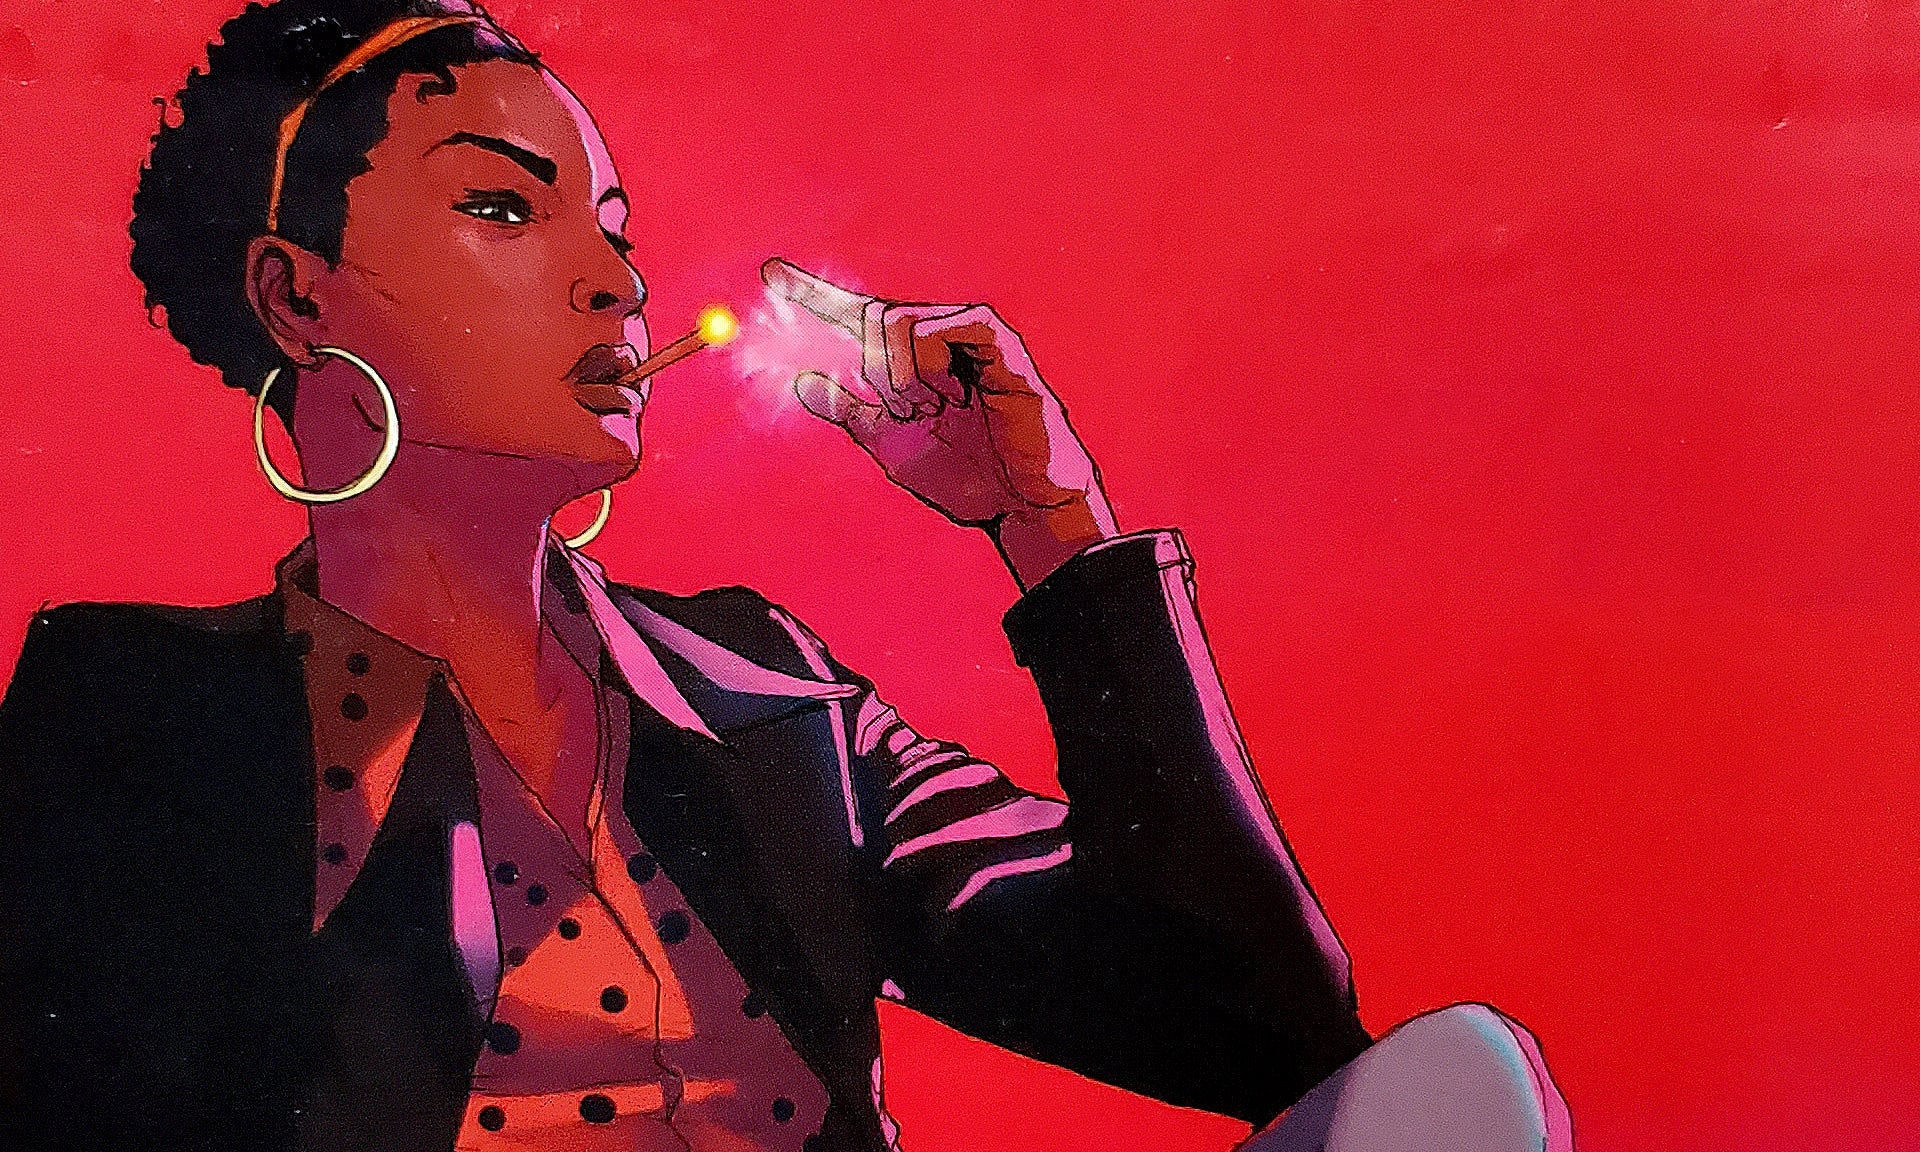 Cropped image of a black woman wearing a headband and large hoop earrings smoking a cigarette against a red background